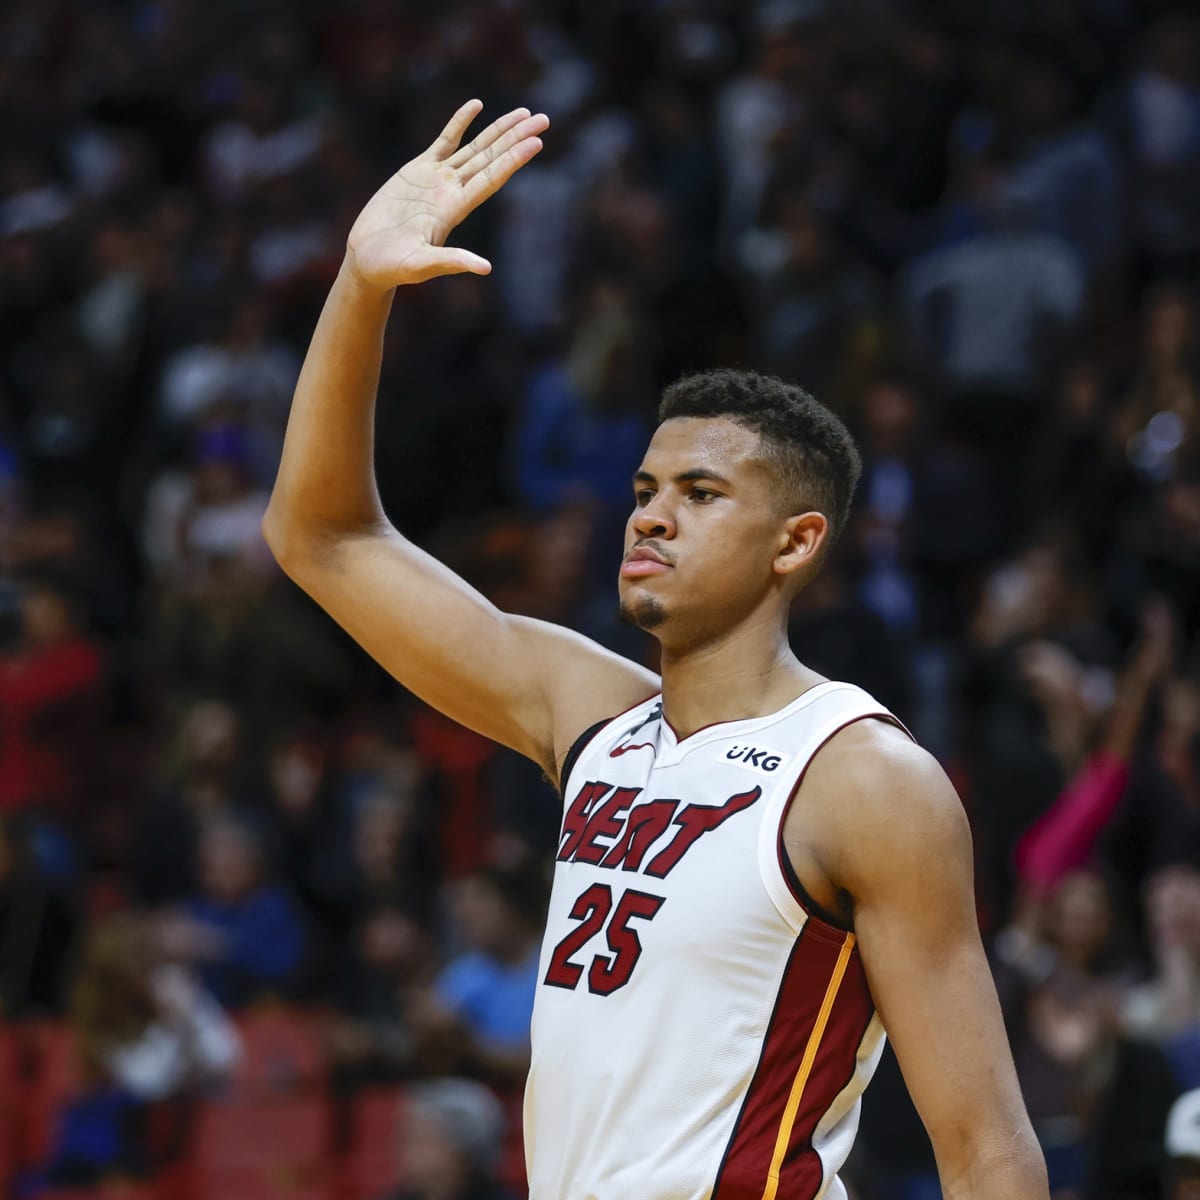 Miami Heat: Orlando Robinson Shows Promise After Exhibit 10 Deal